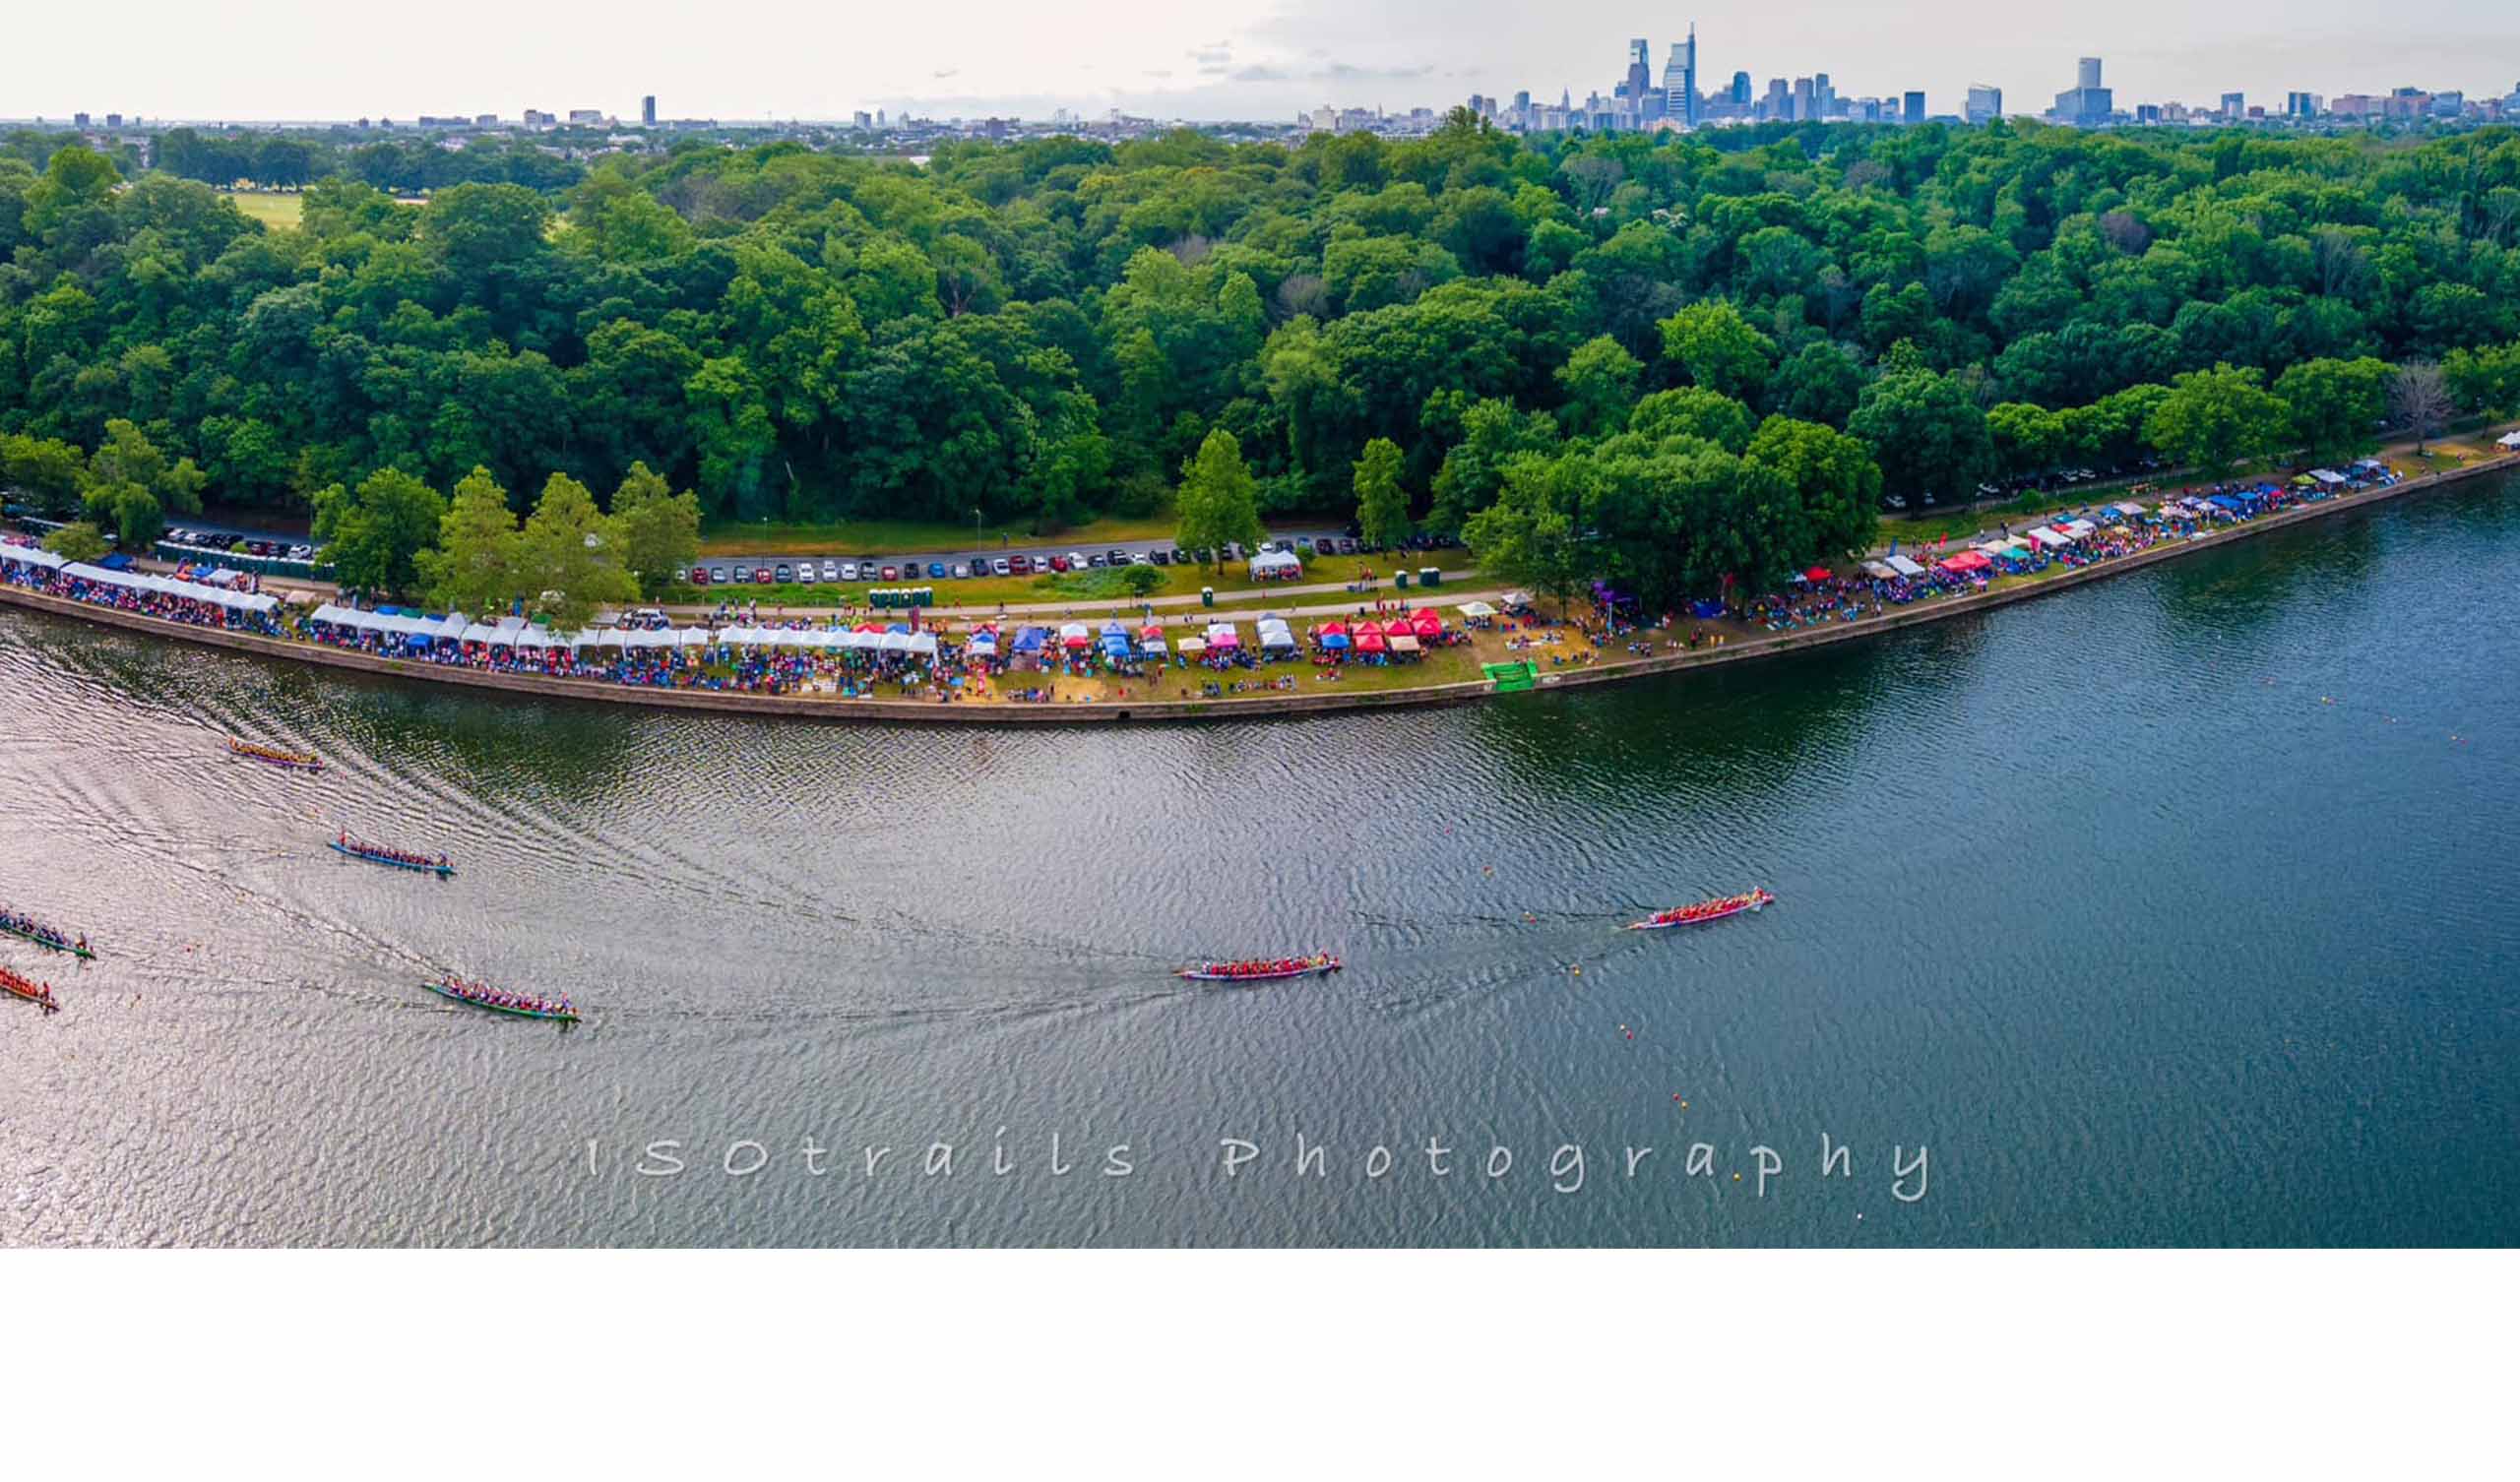 independence-dragon-boat-regatta-by-isotrails-photography